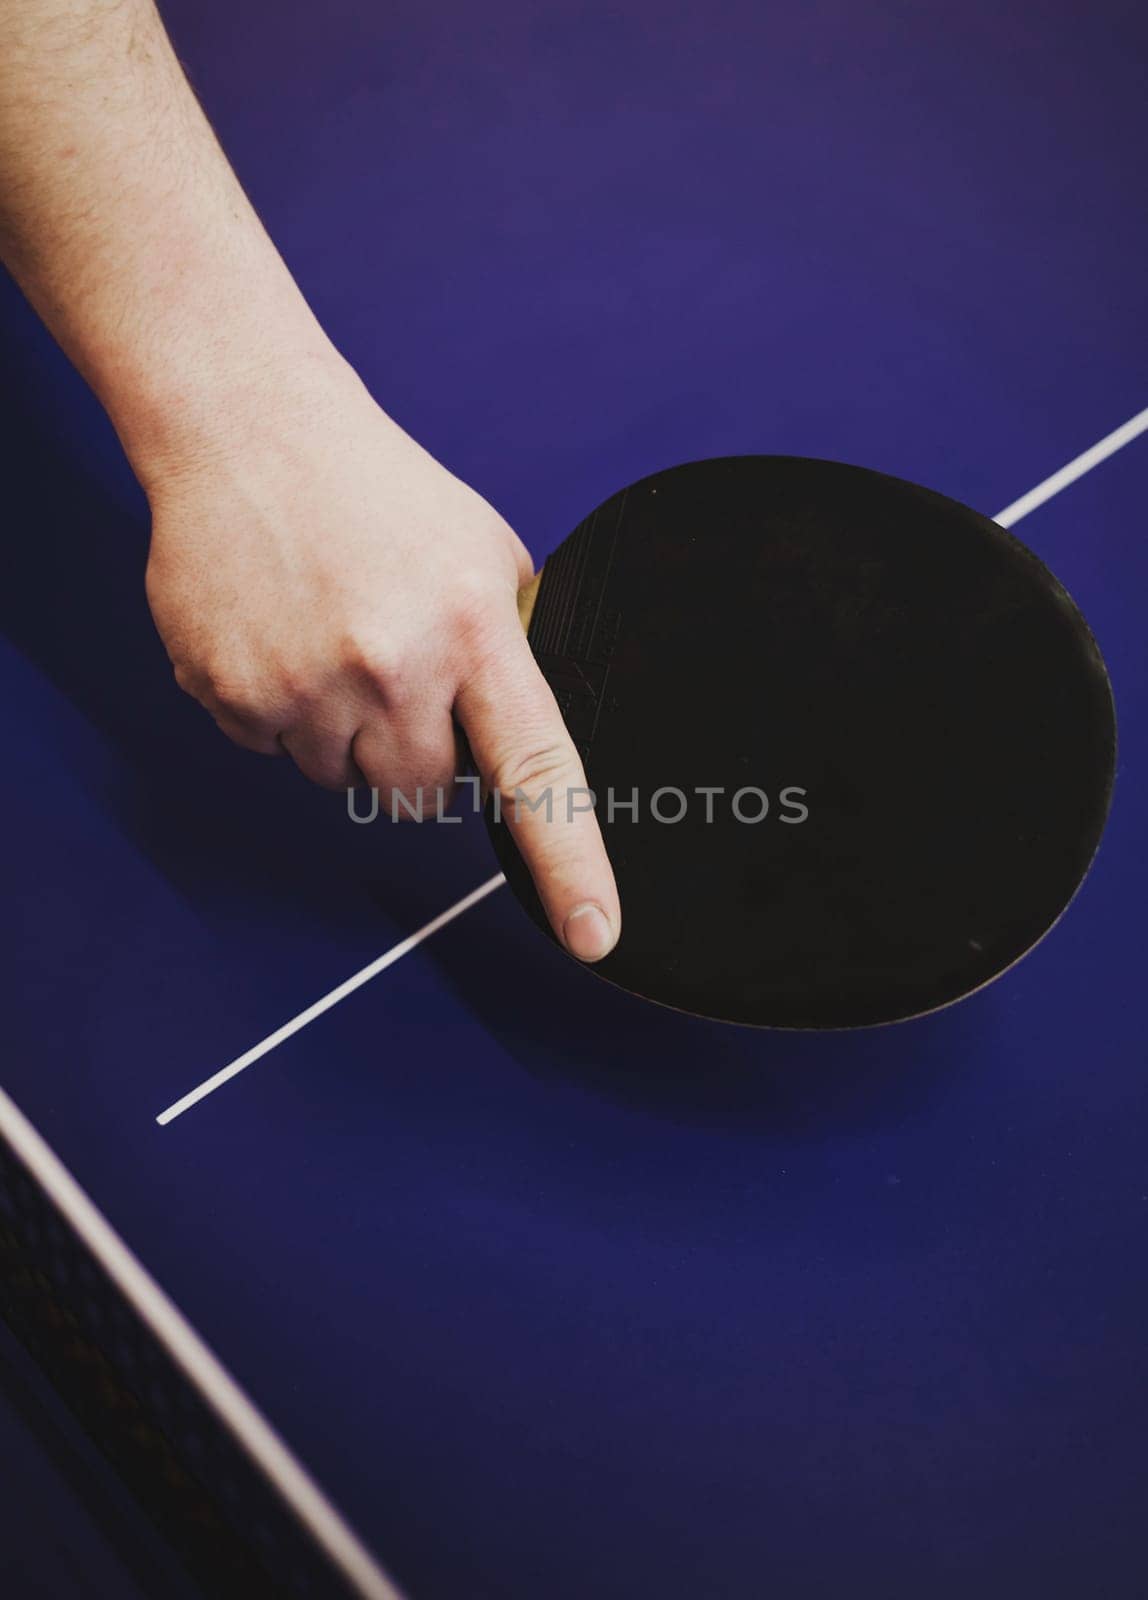 professional ping pong player. hand with a tennis racket on the background of the board